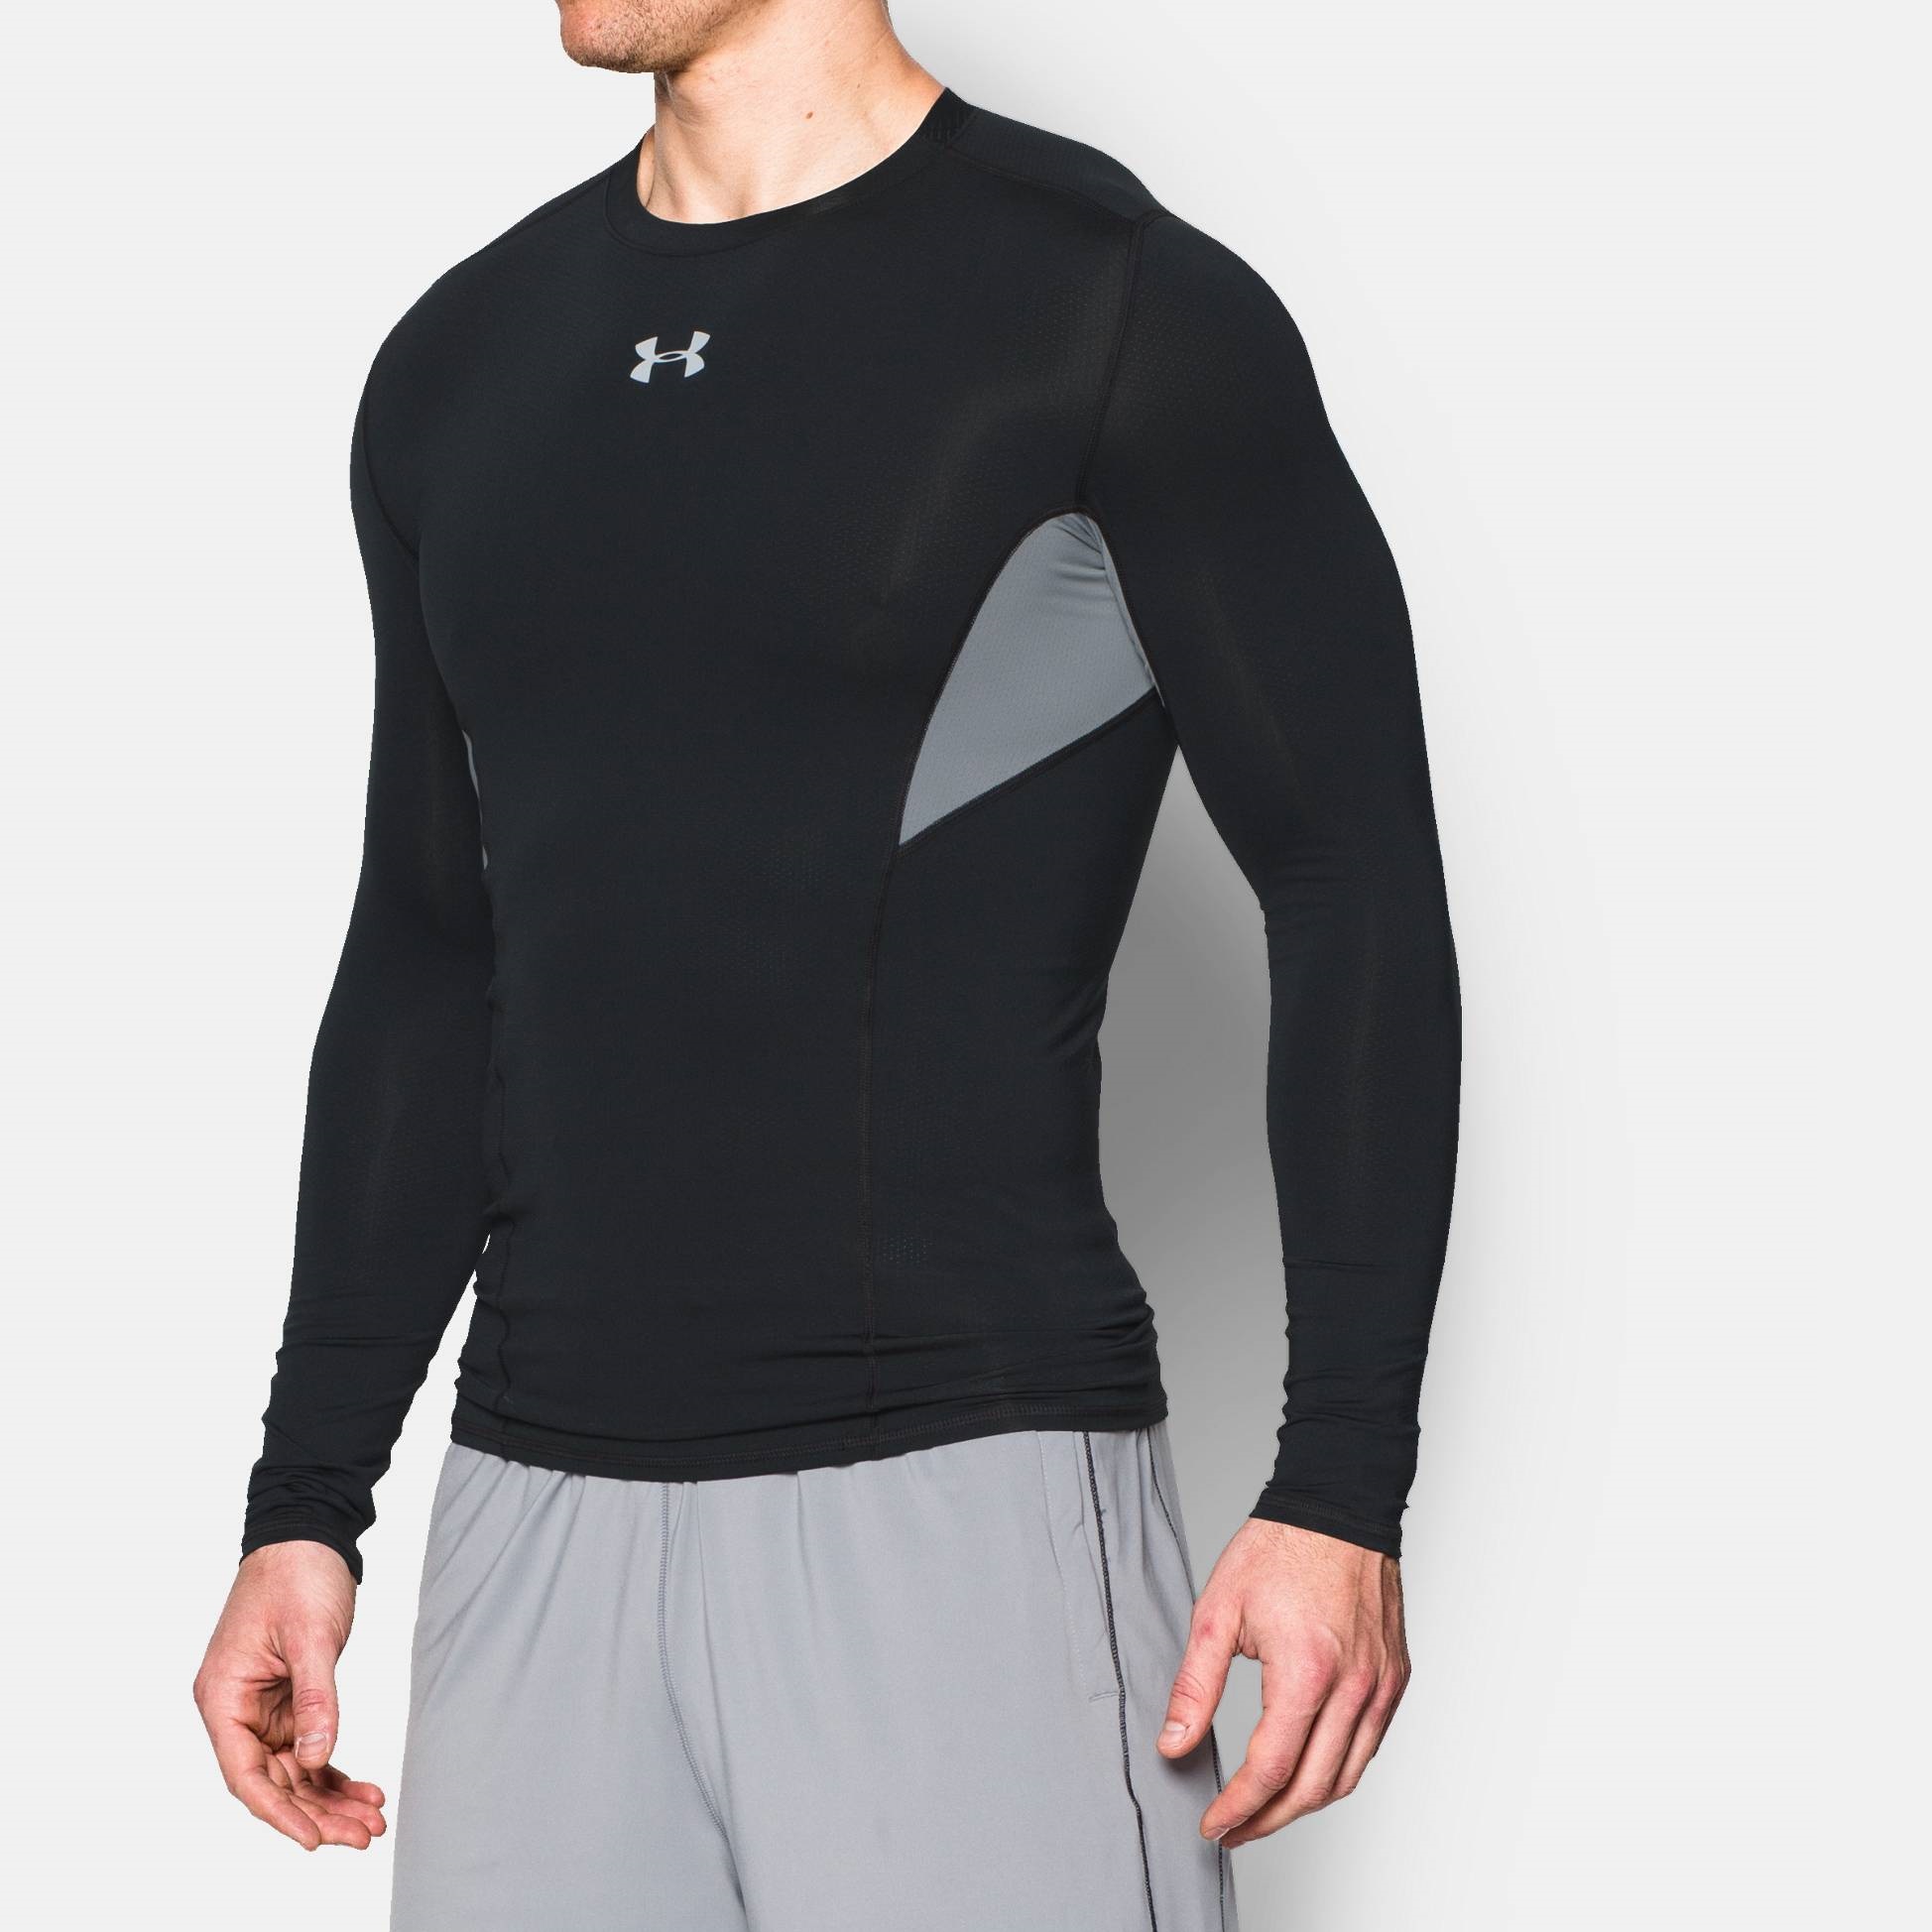  -  under armour CoolSwitch Compression Shirt